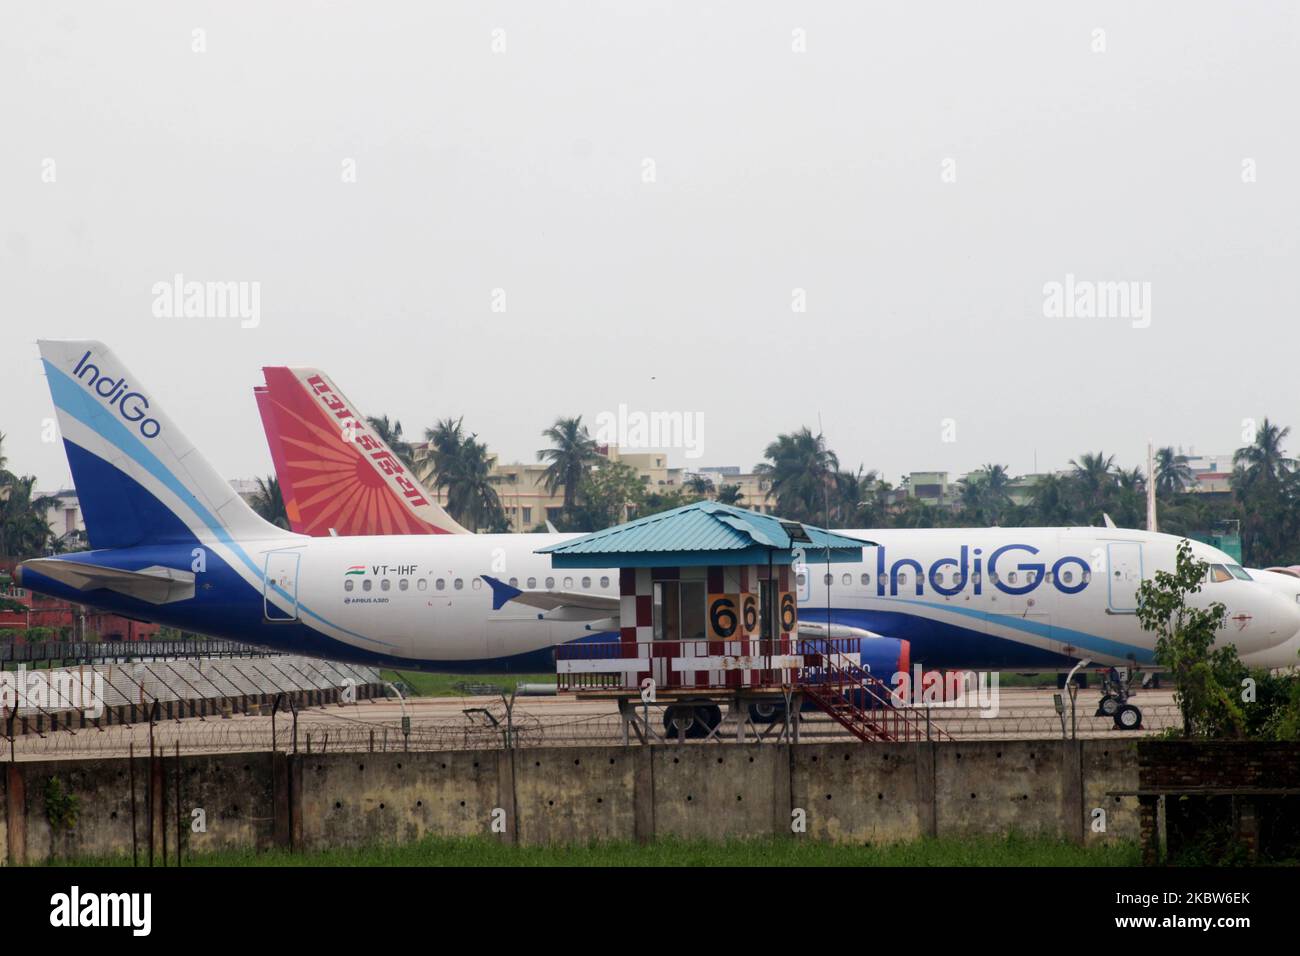 Air planes are seen parked at the Netaji Subhash Chandra Bose International Airport, as flight operations are suspended from July 25 to 29 during Complete lockdown against the spread of the COVID-19 coronavirus, in Kolkata,India on July 25, 2020. India is the third hardest-hit country by the pandemic in the world after the United States and Brazil. (Photo by Debajyoti Chakraborty/NurPhoto) Stock Photo